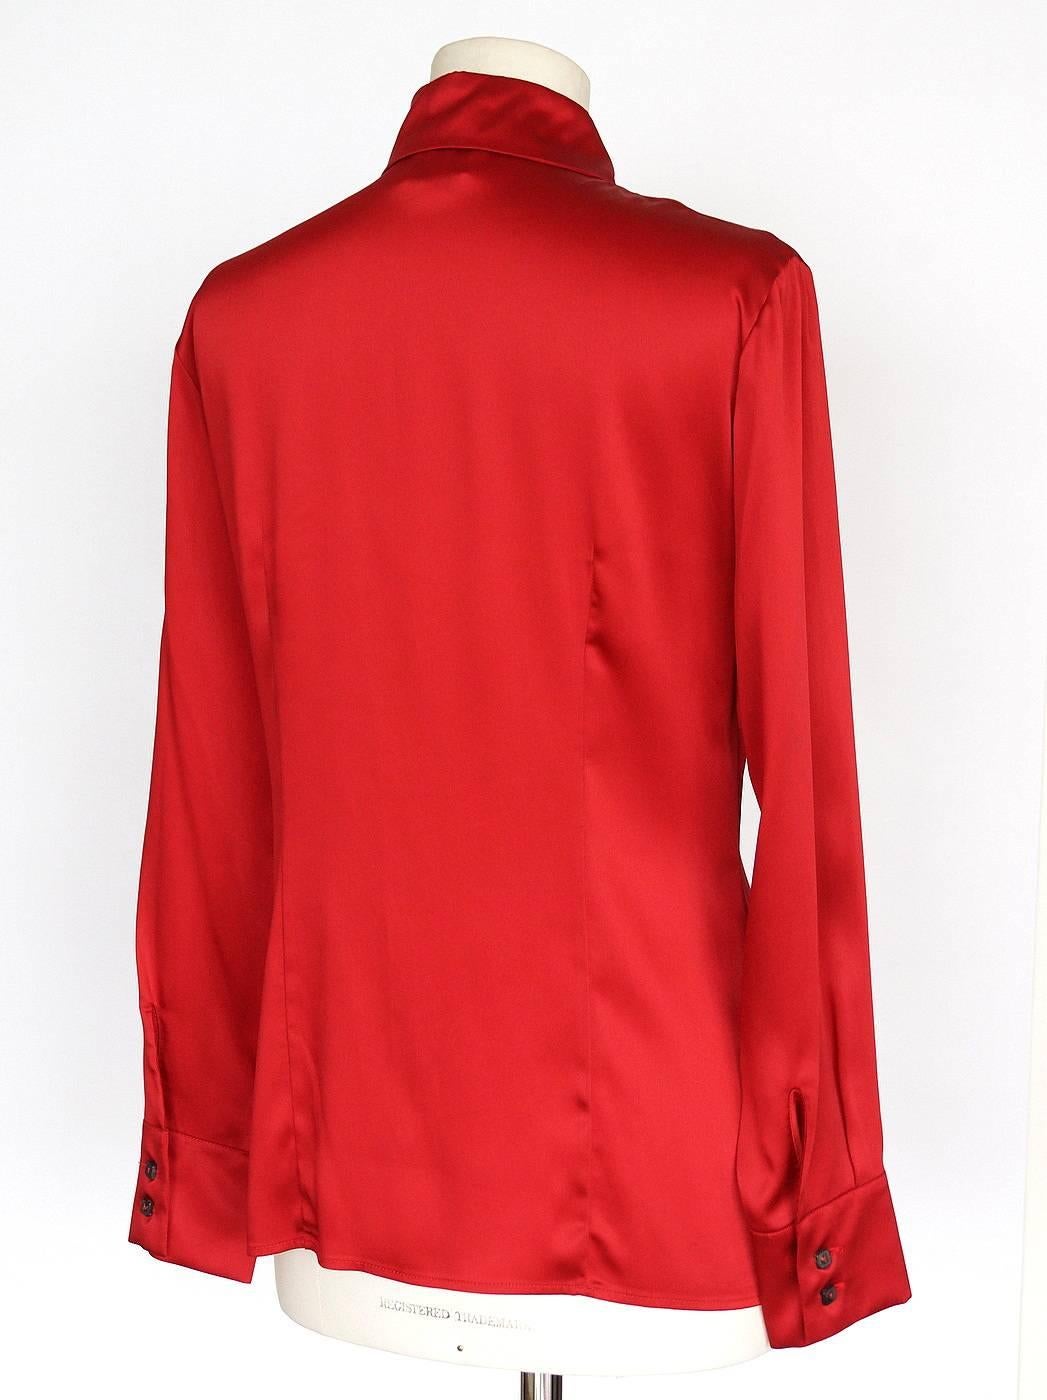 Women's Gianfranco Ferre Top Jewel Chinese Red Blouse Unique Buttons 42 / 6